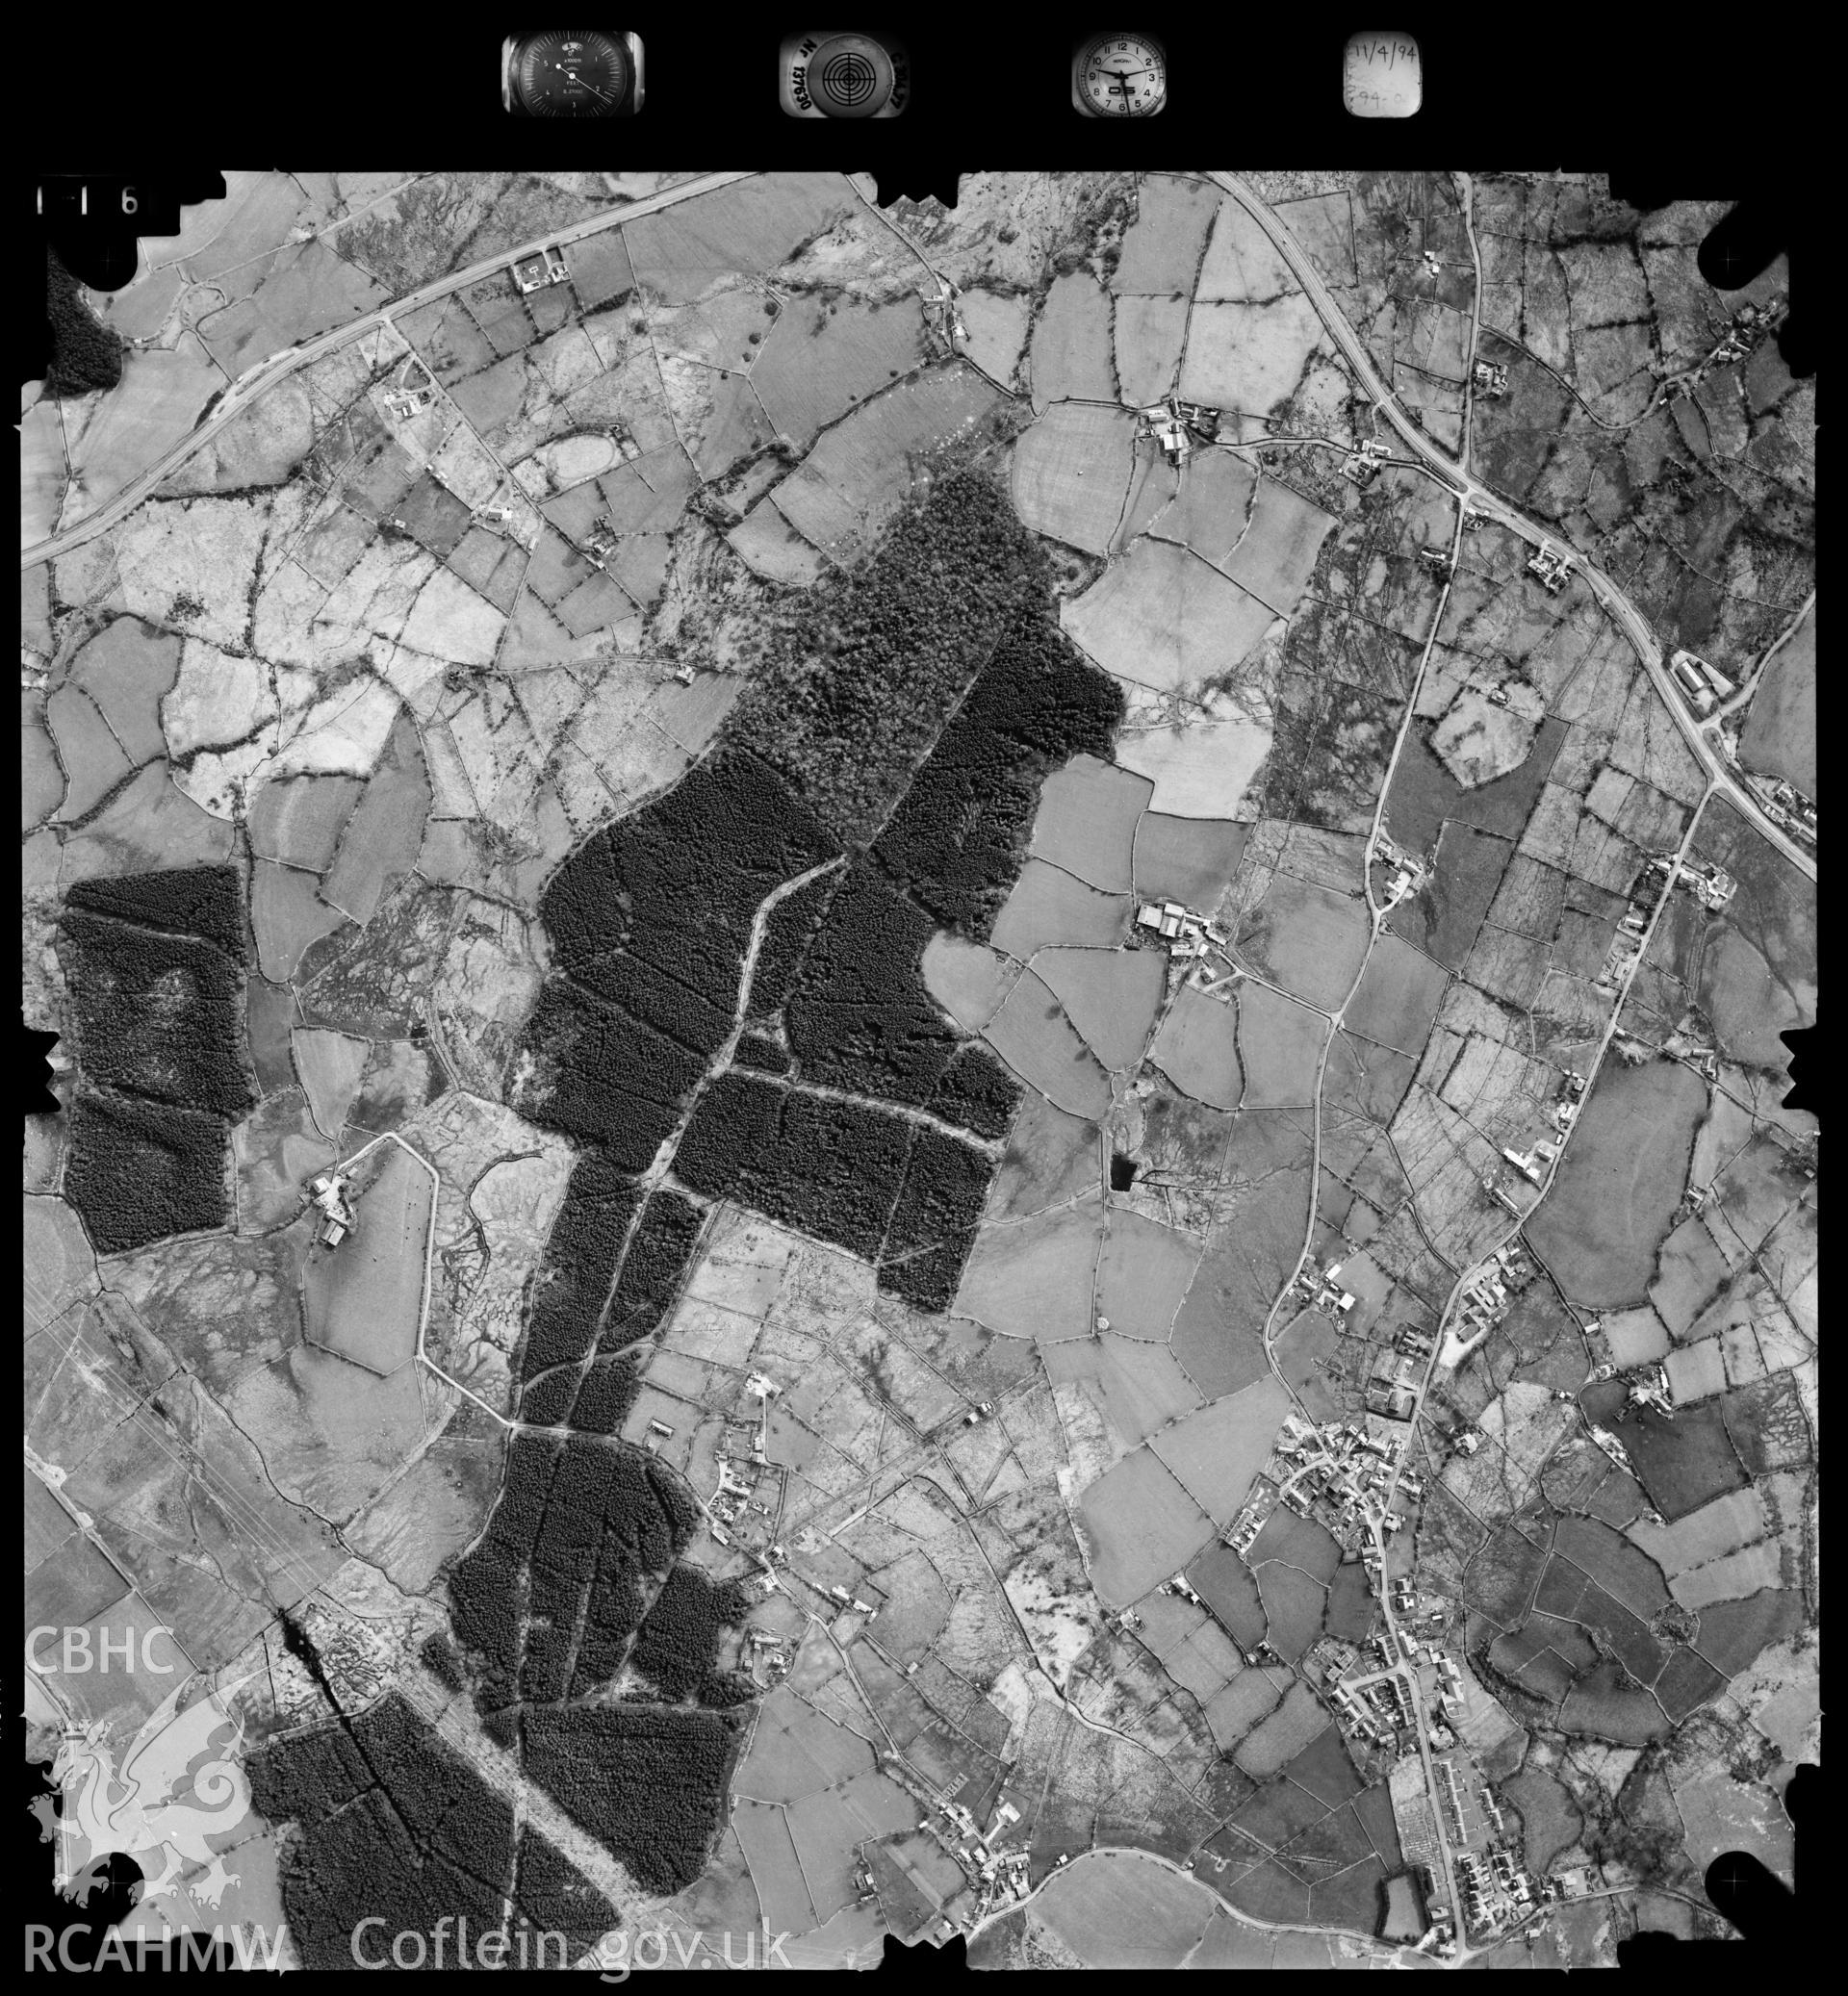 Digitized copy of an aerial photograph showing the Waun area, taken by Ordnance Survey, 1994.